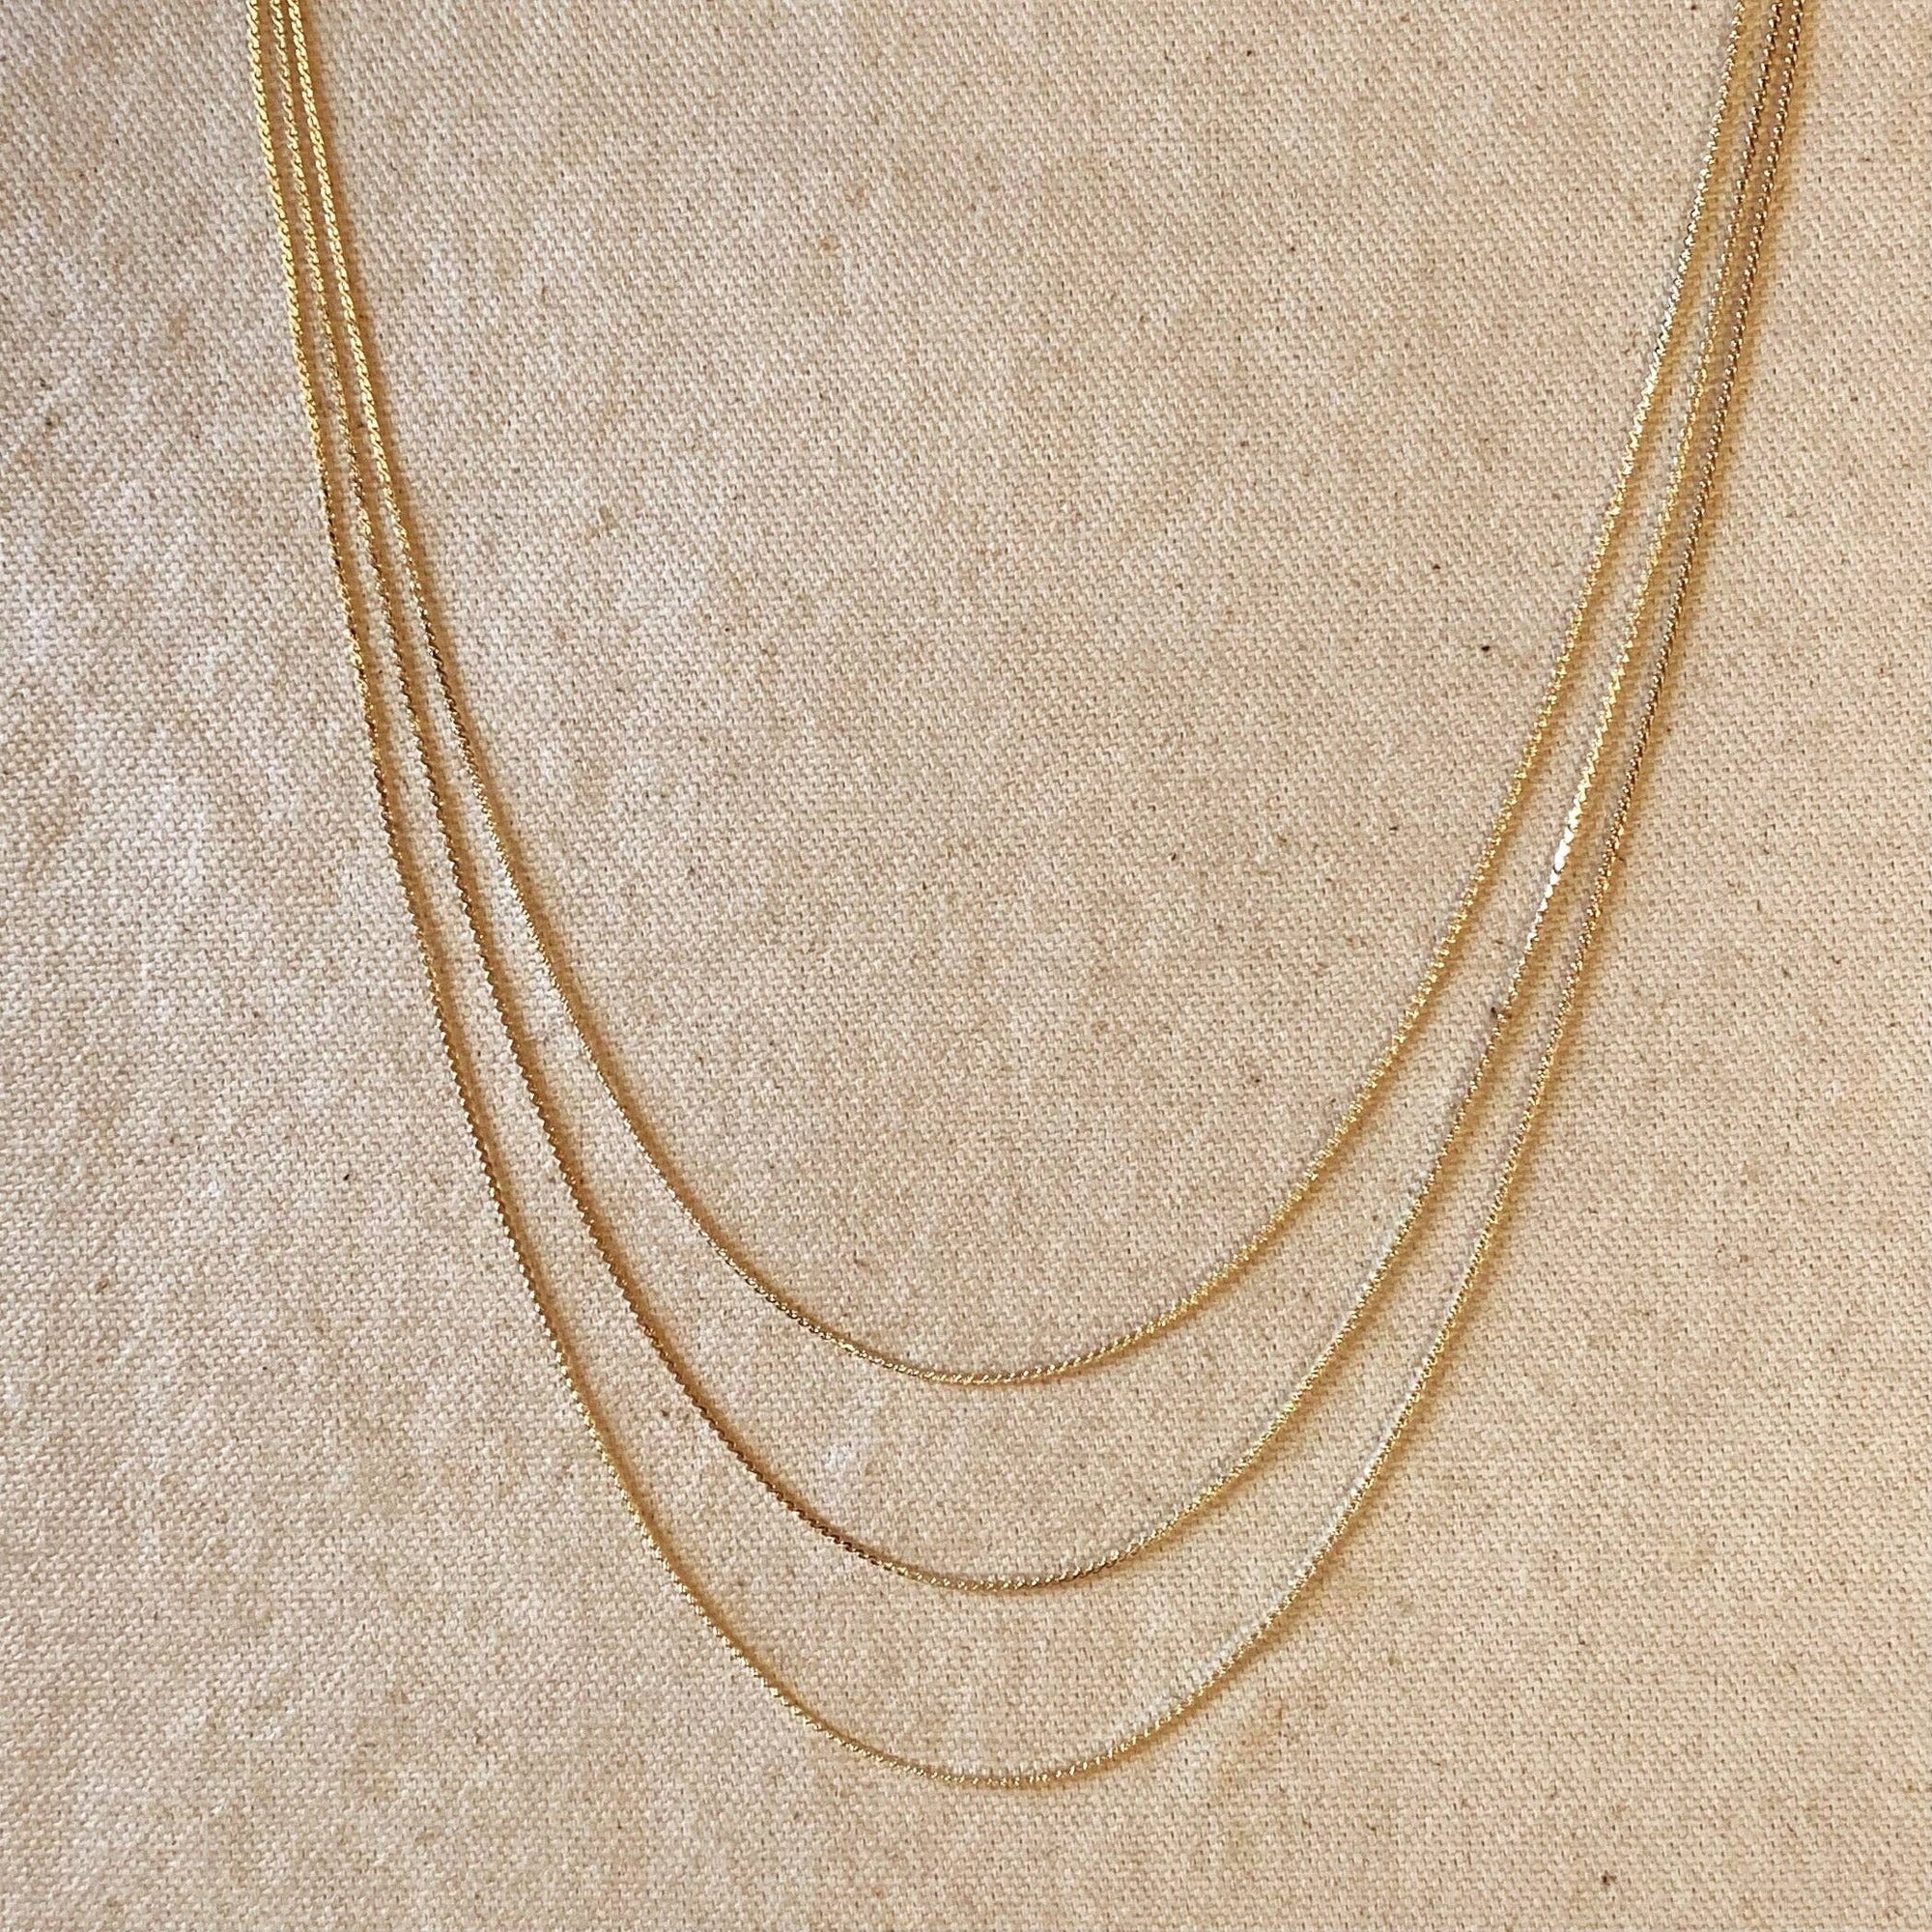 Dainty Chain Necklace, 18k Gold Filled